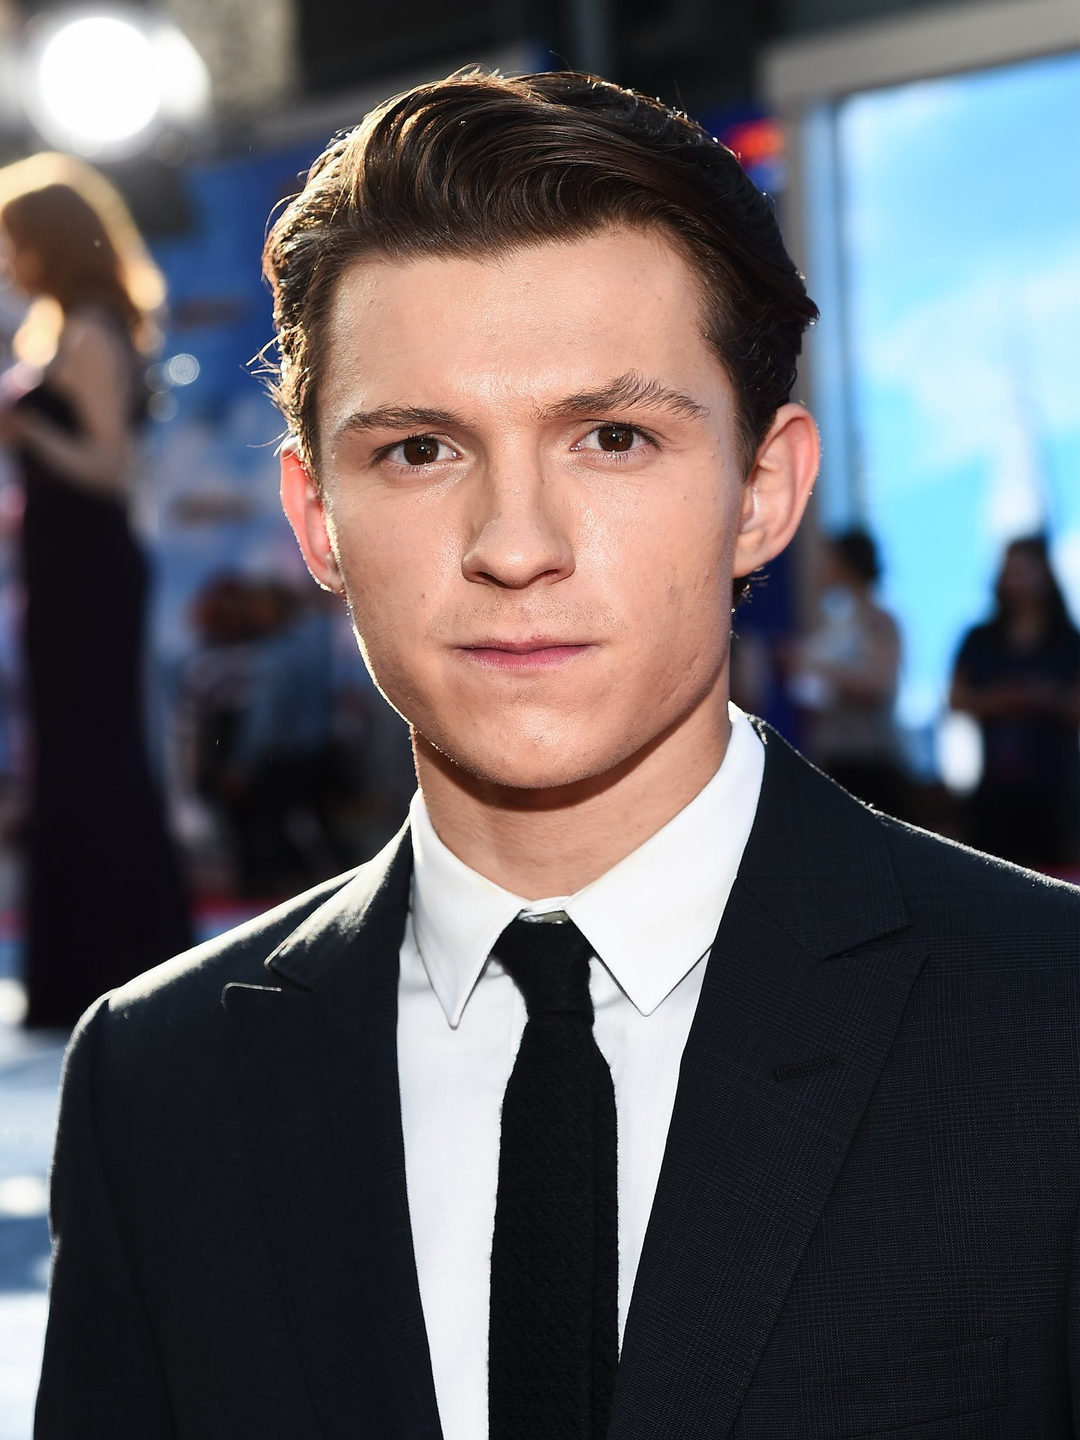 Tom Holland how did he became famous